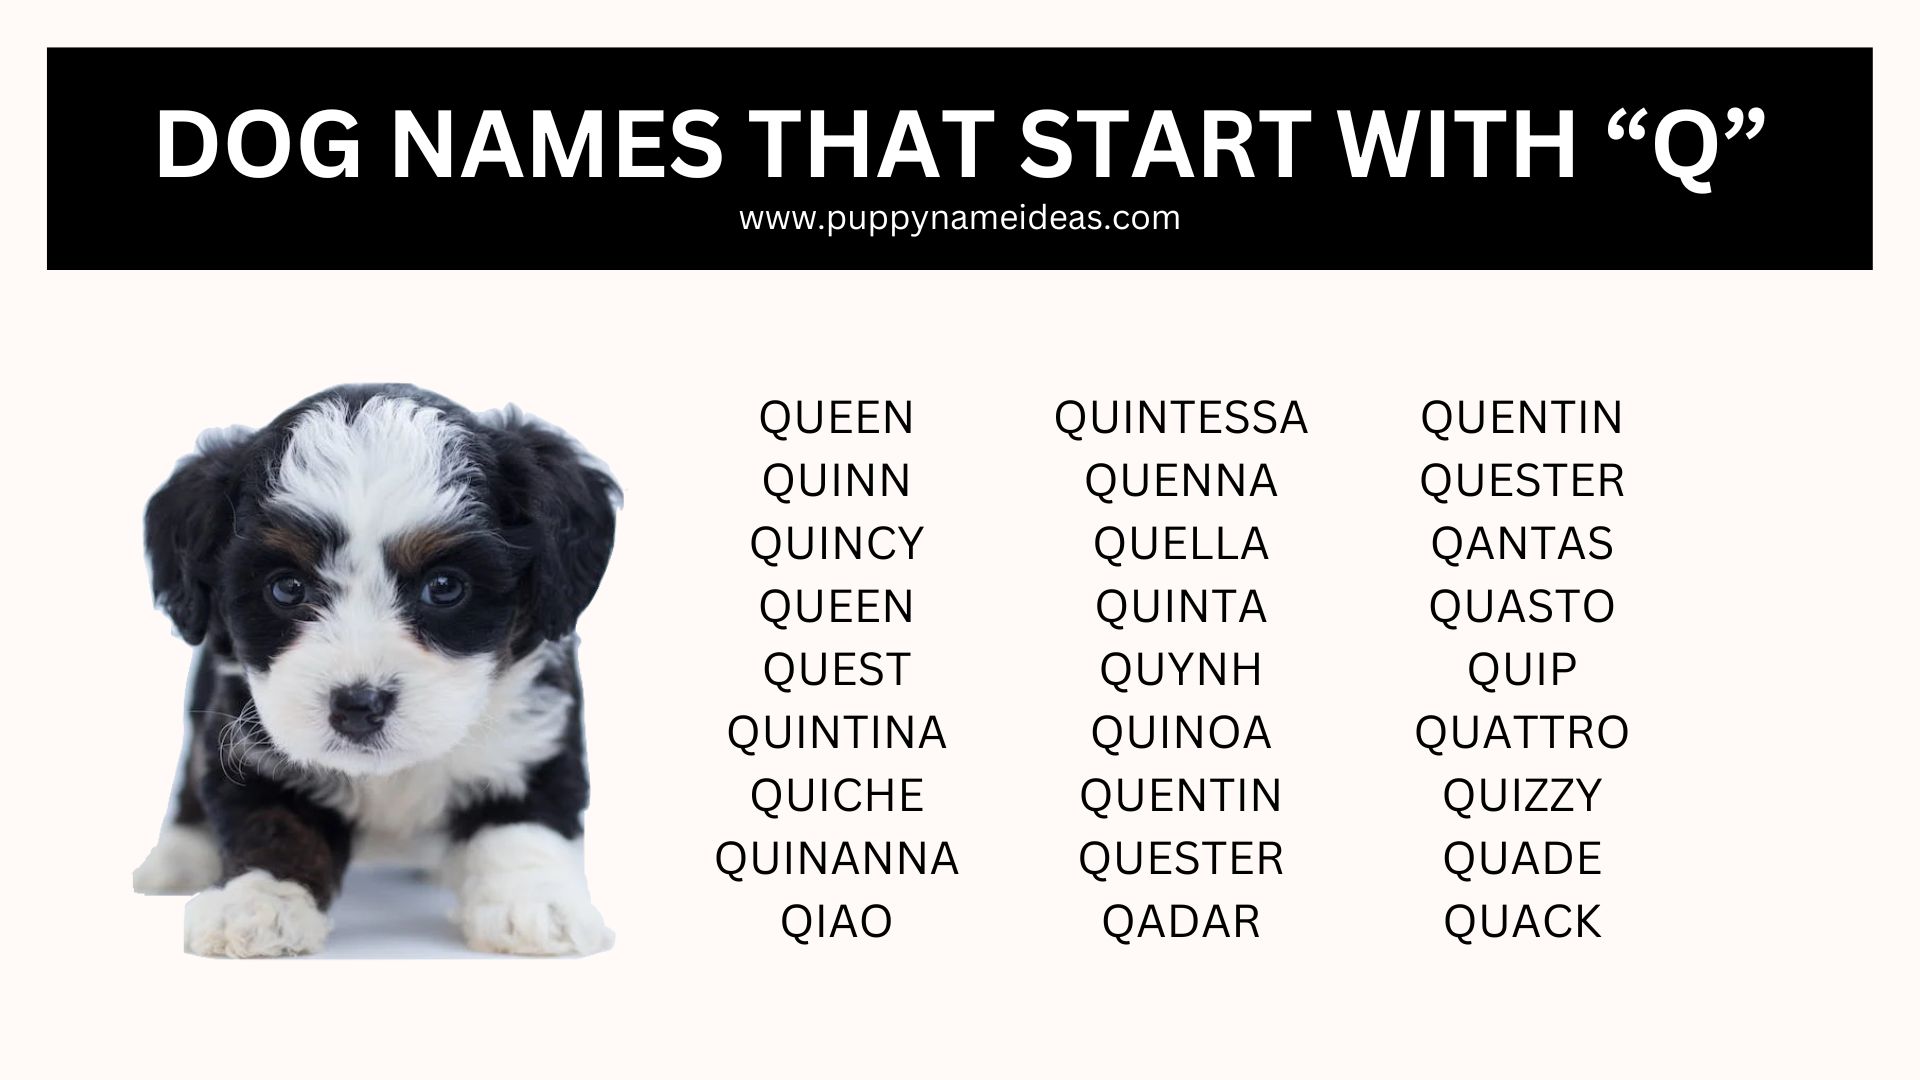 List of dog names that start with Q